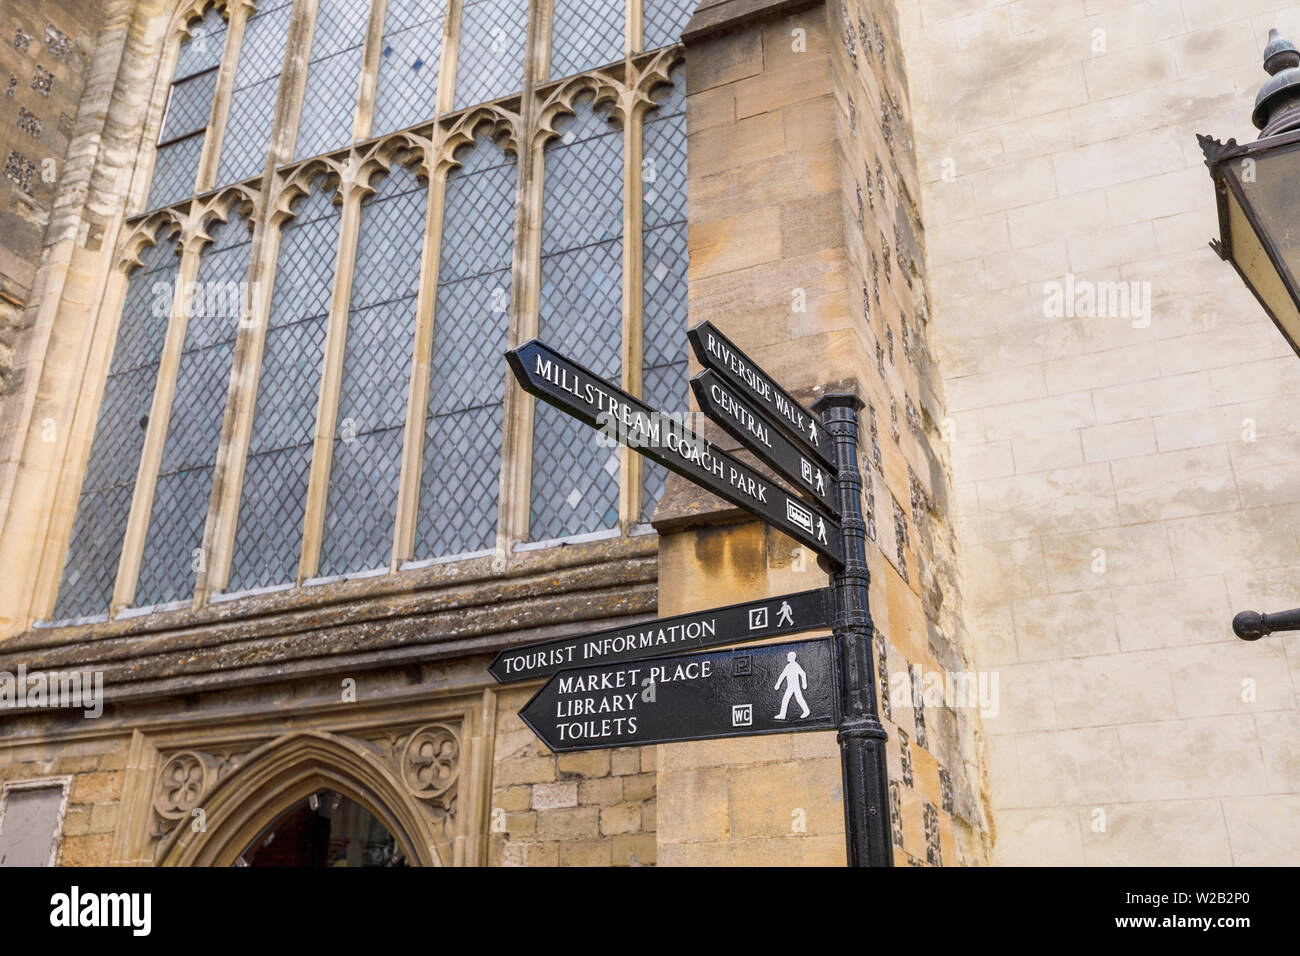 Traditional old-fashioned signpost direction sign pointing to attractions and amenities in Salisbury town centre, a cathedral city in Wiltshire, UK Stock Photo